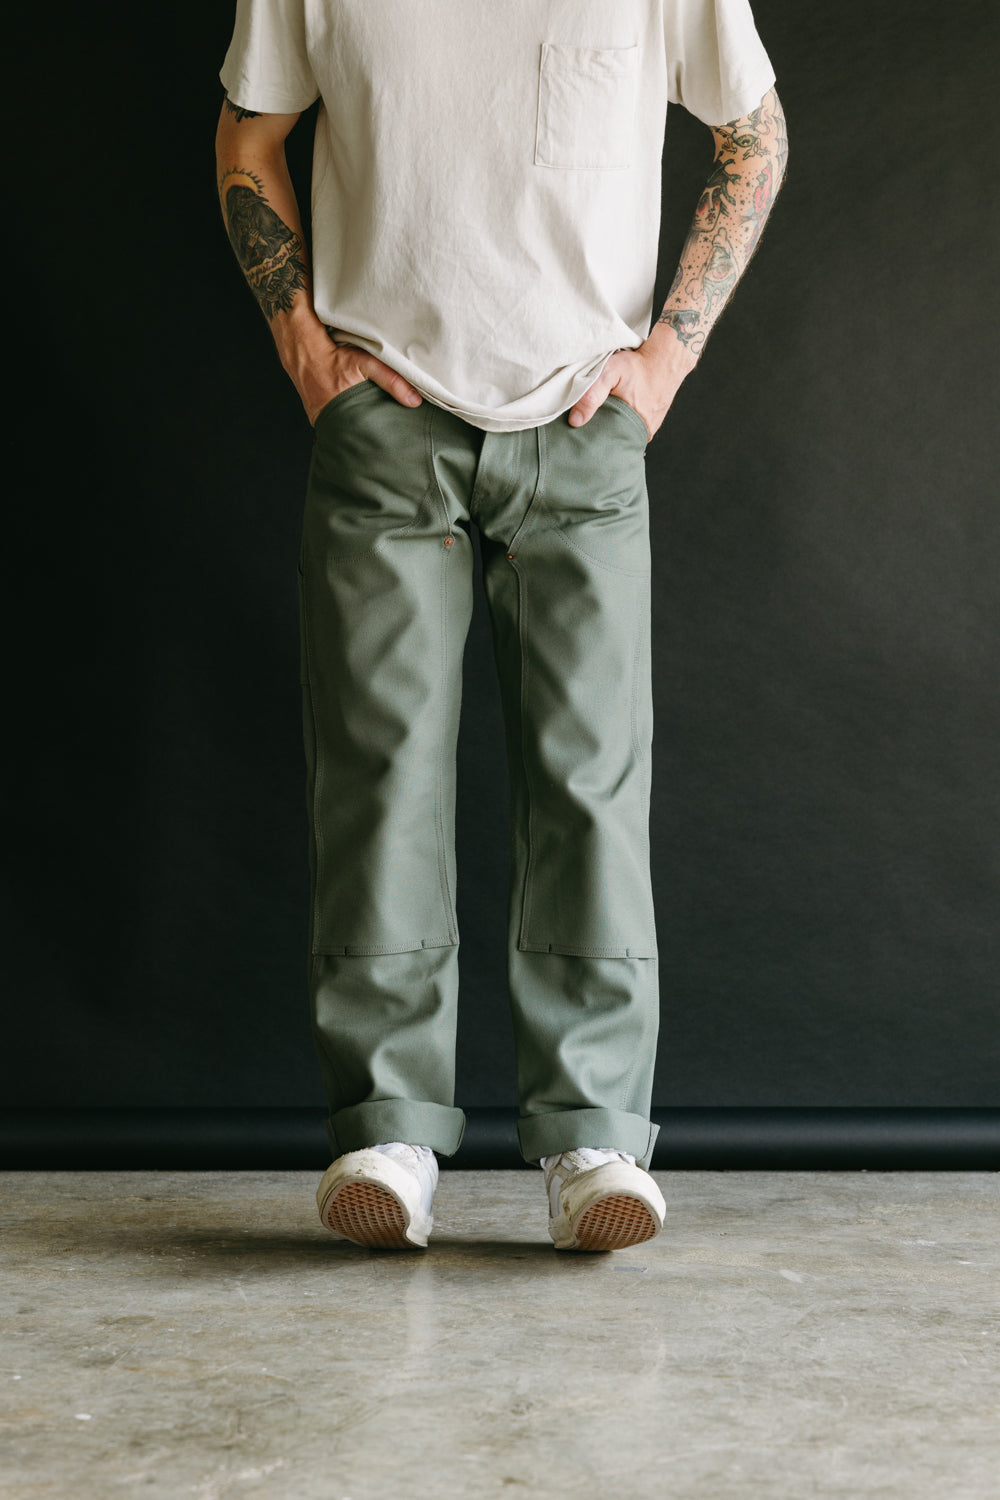 13oz - Wendell Double | Pant Smithson James Dant M*A*S*H - Knee Canvas